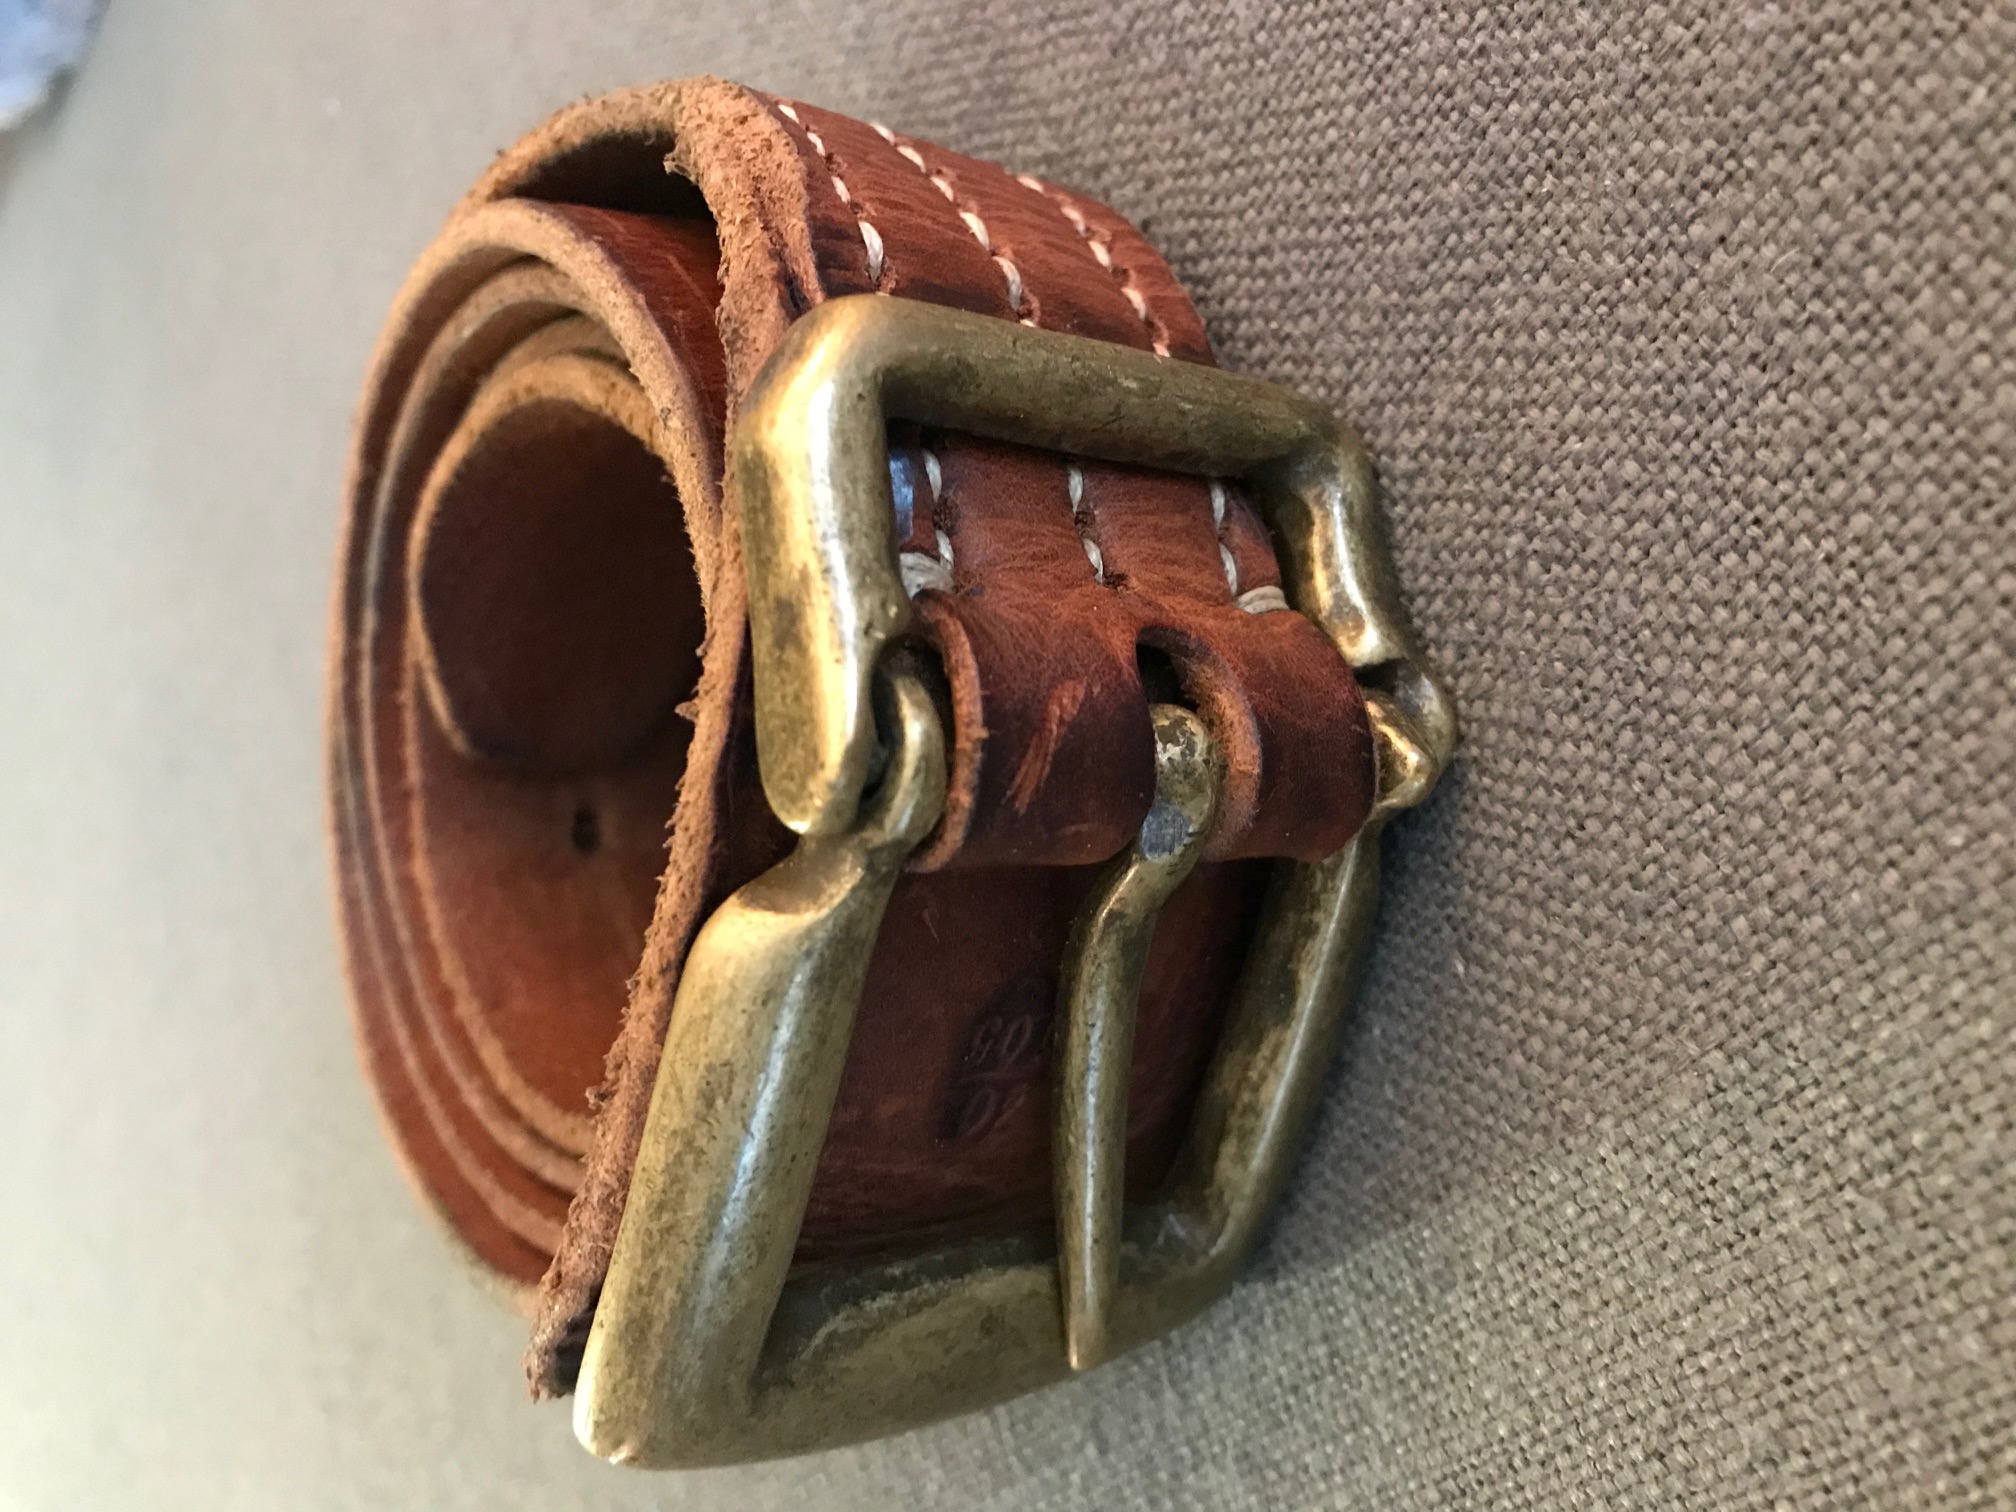 Handmade in Greece, Thedi Leather Belt size 41